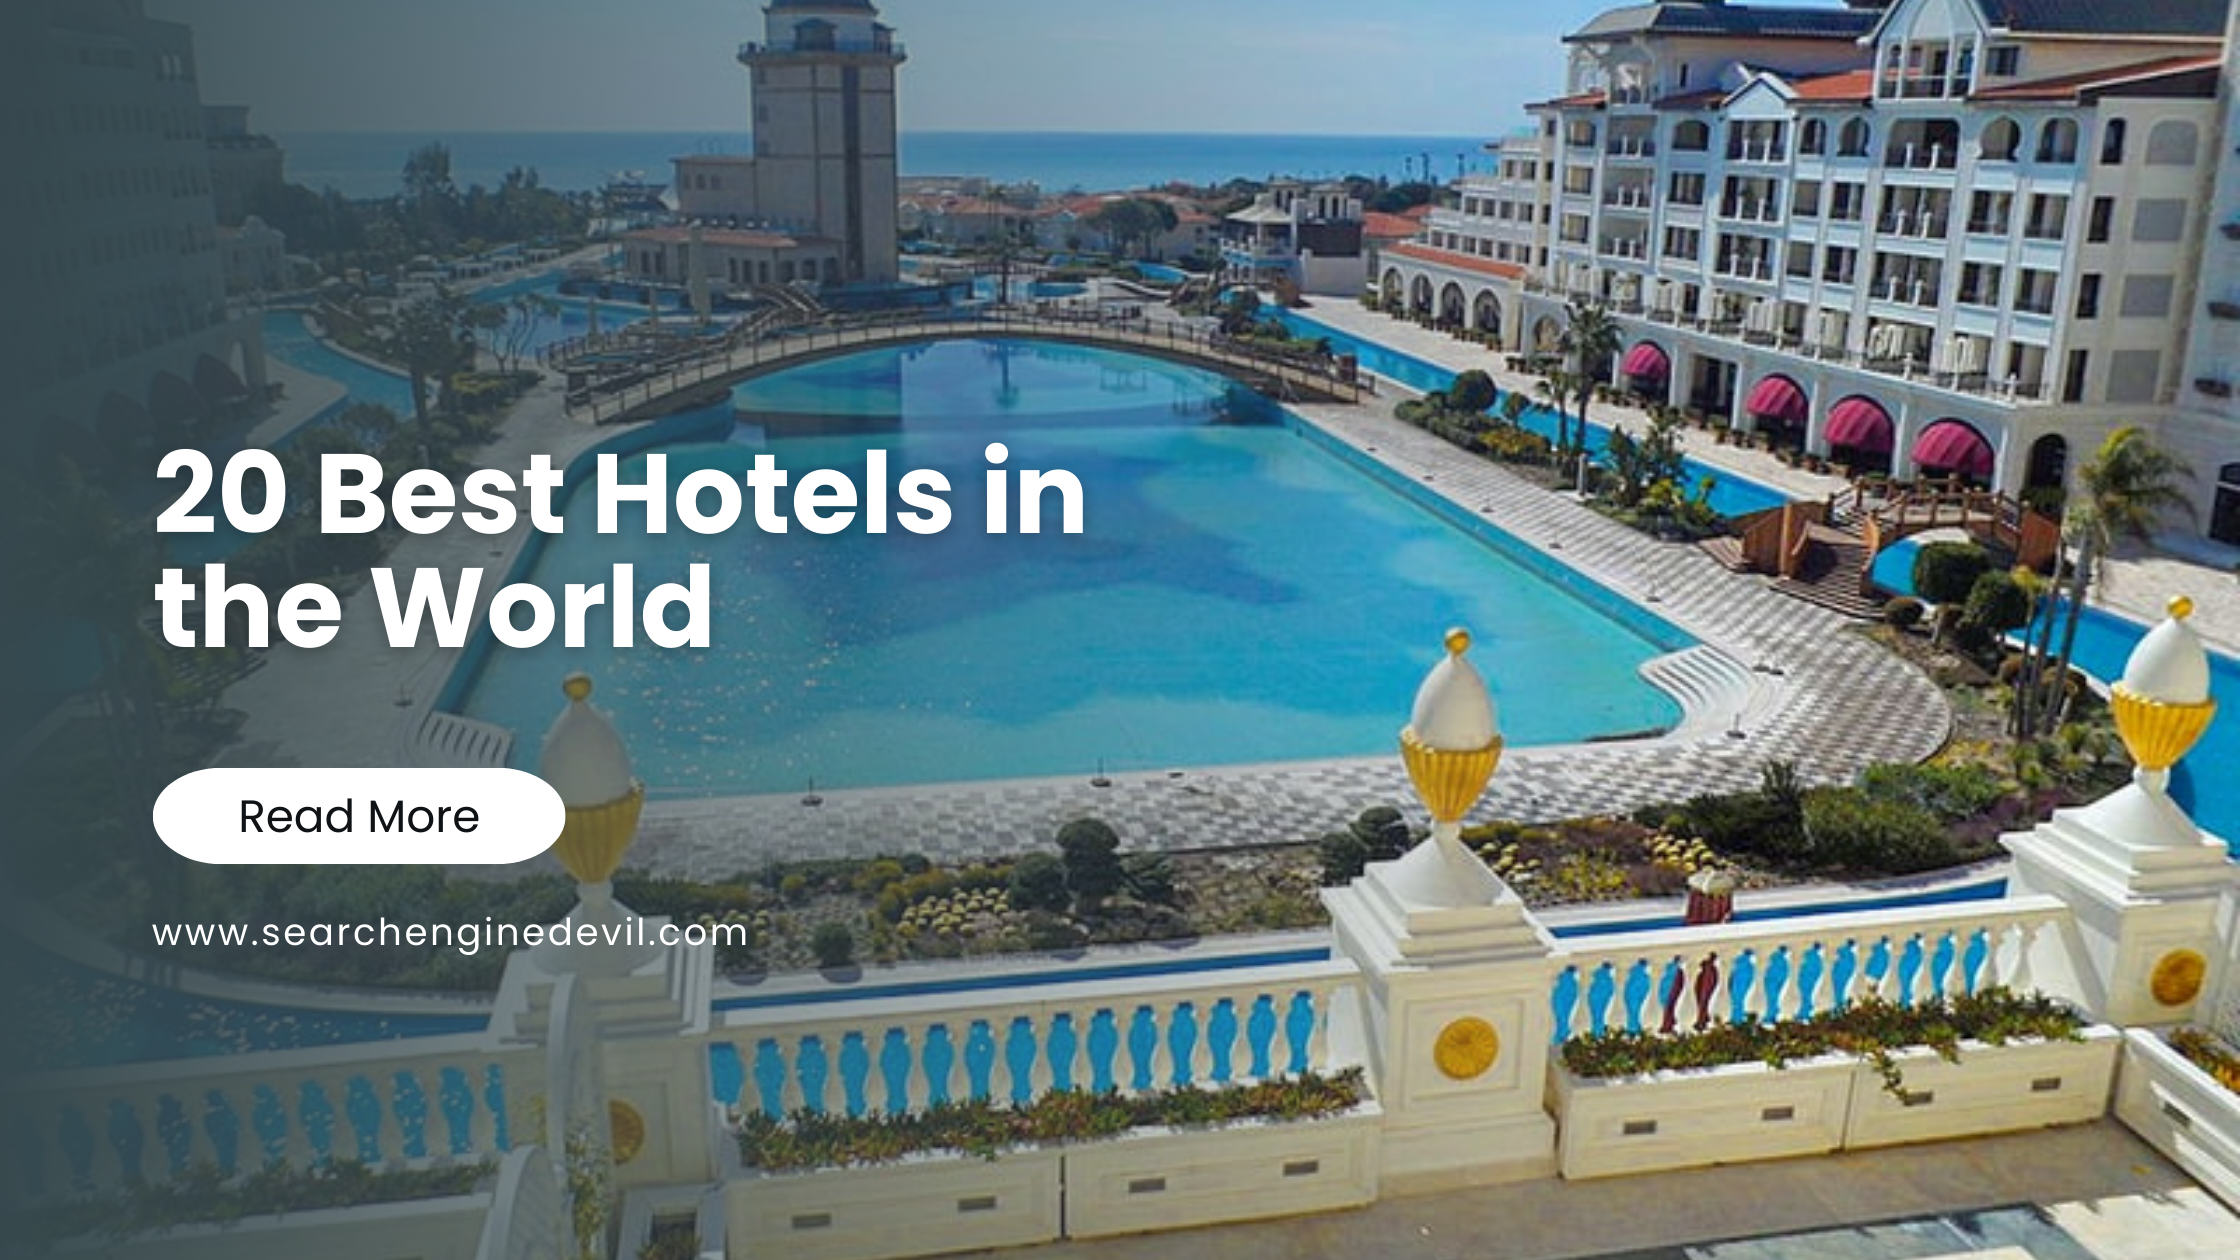 20 Best Hotels in the World